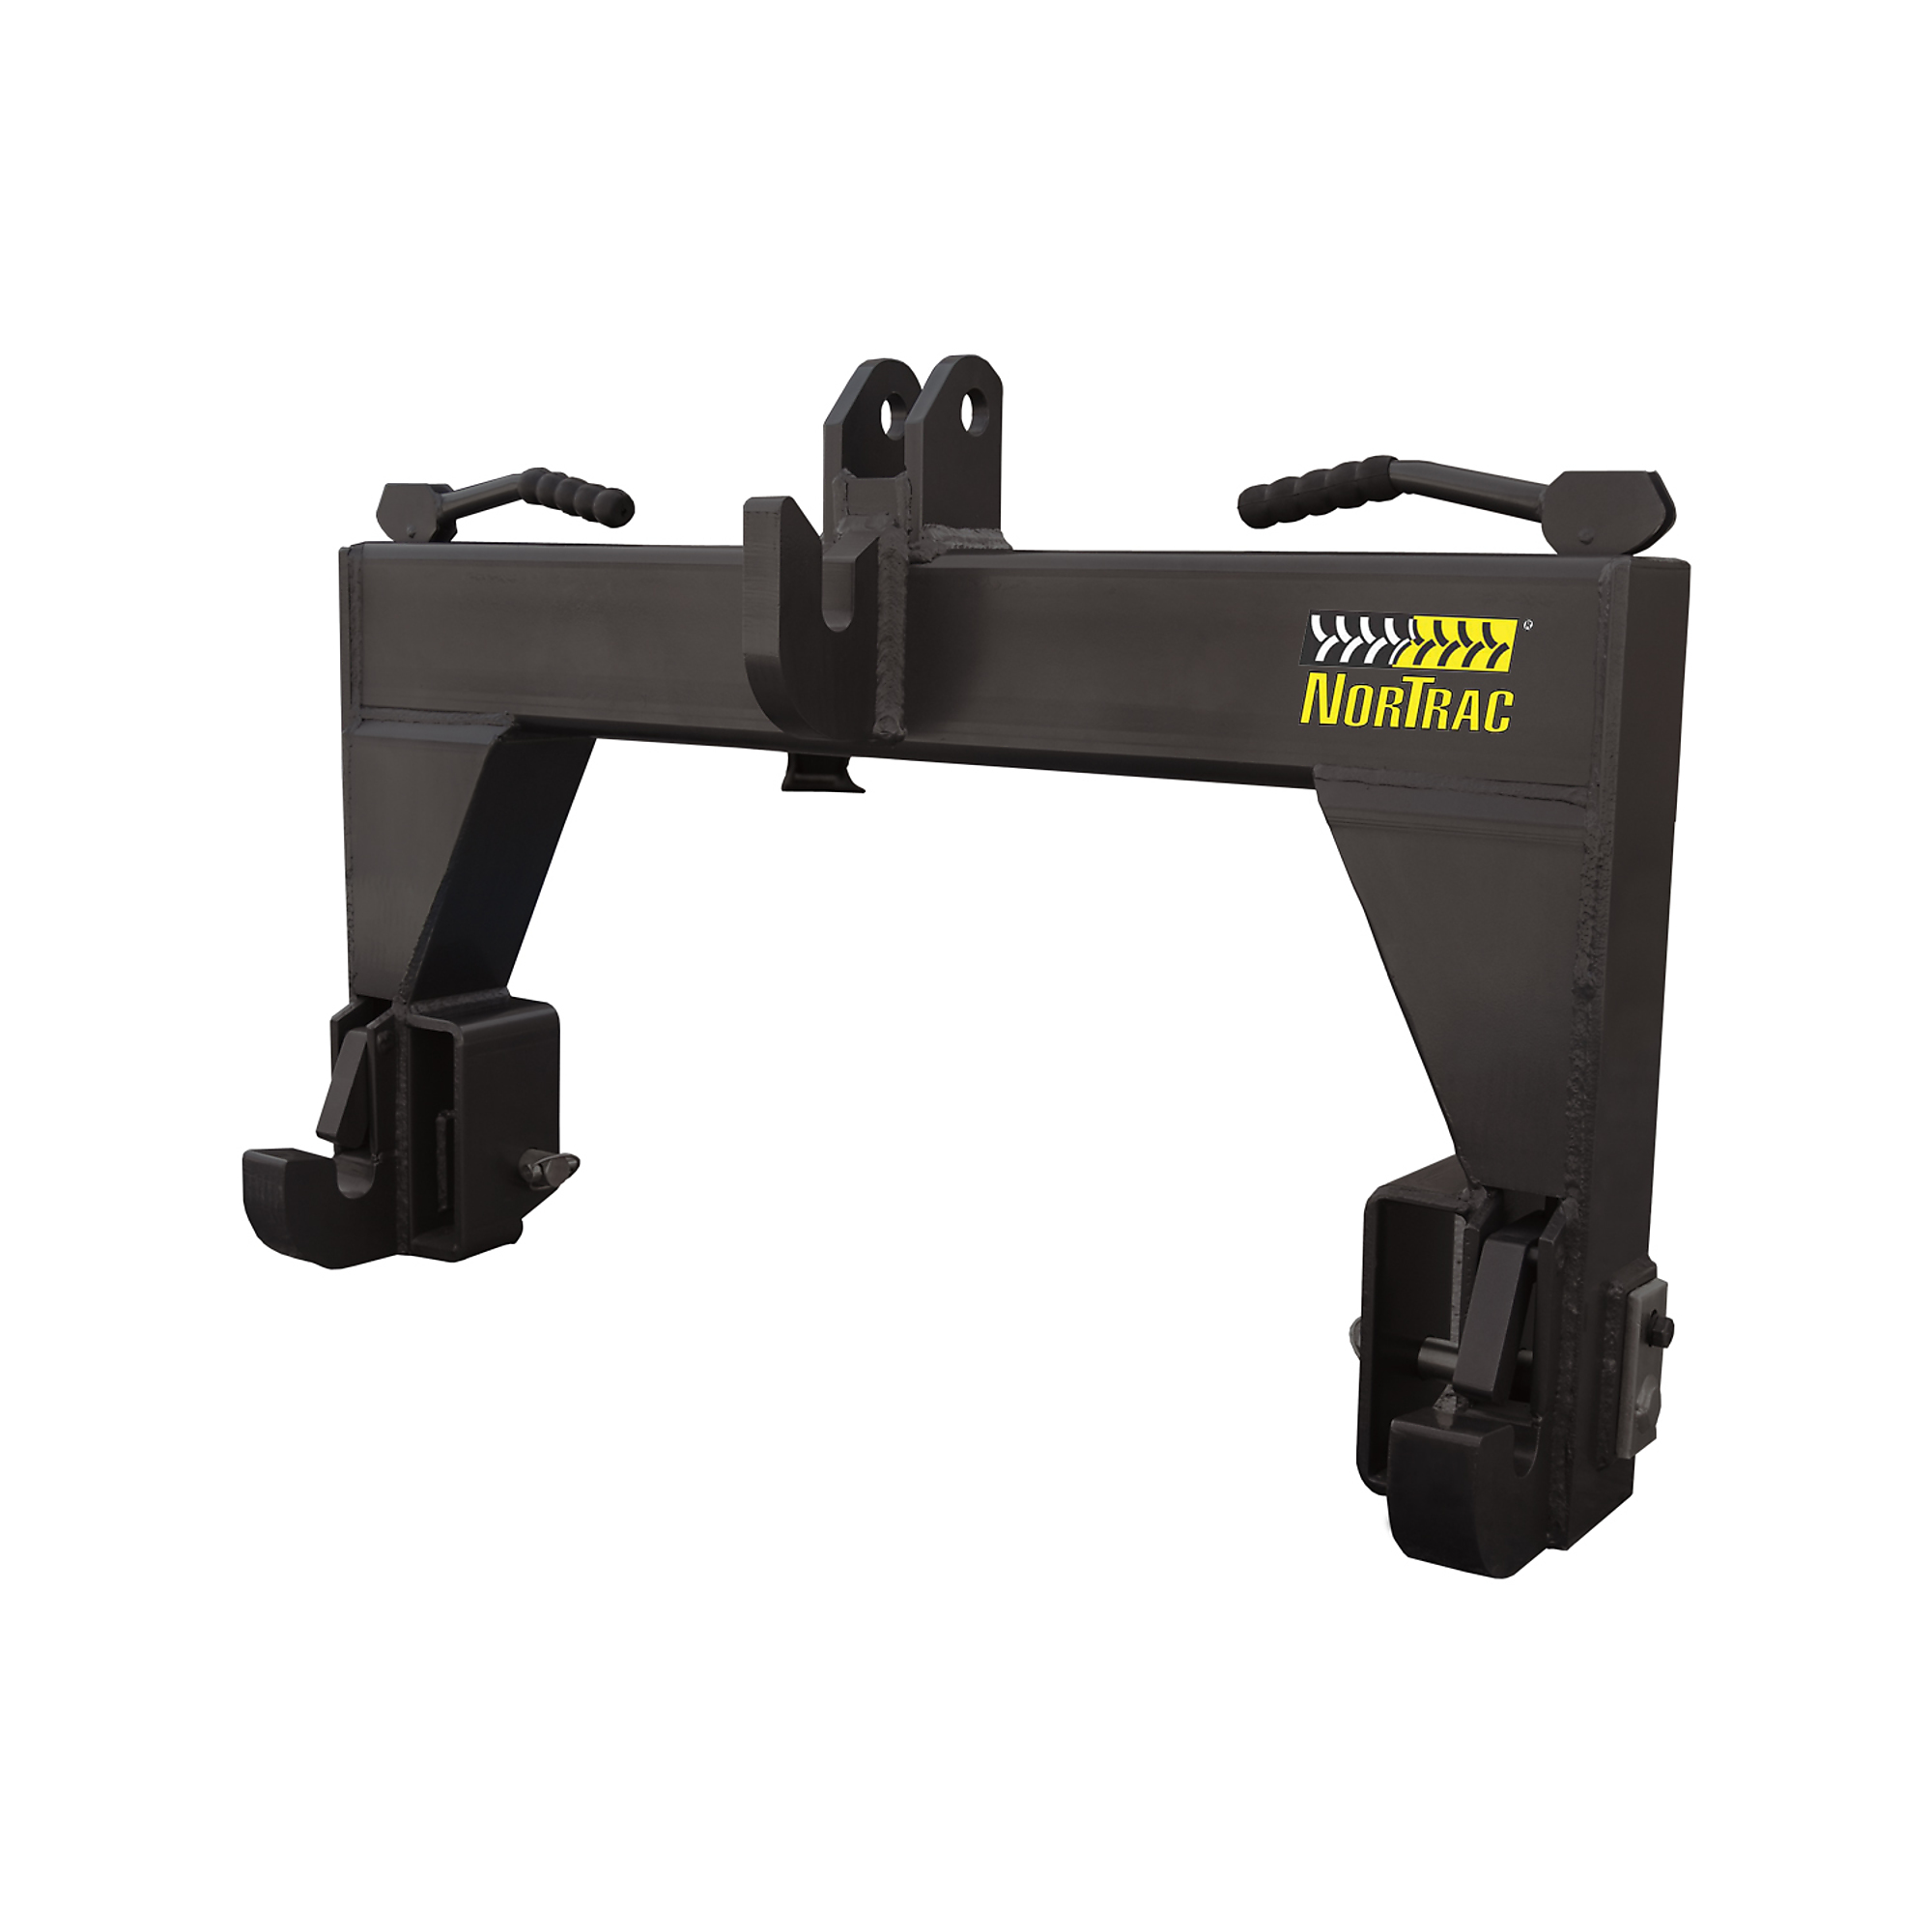 NorTrac 3-Point Quick Hitch, Category 2, Model QH2N